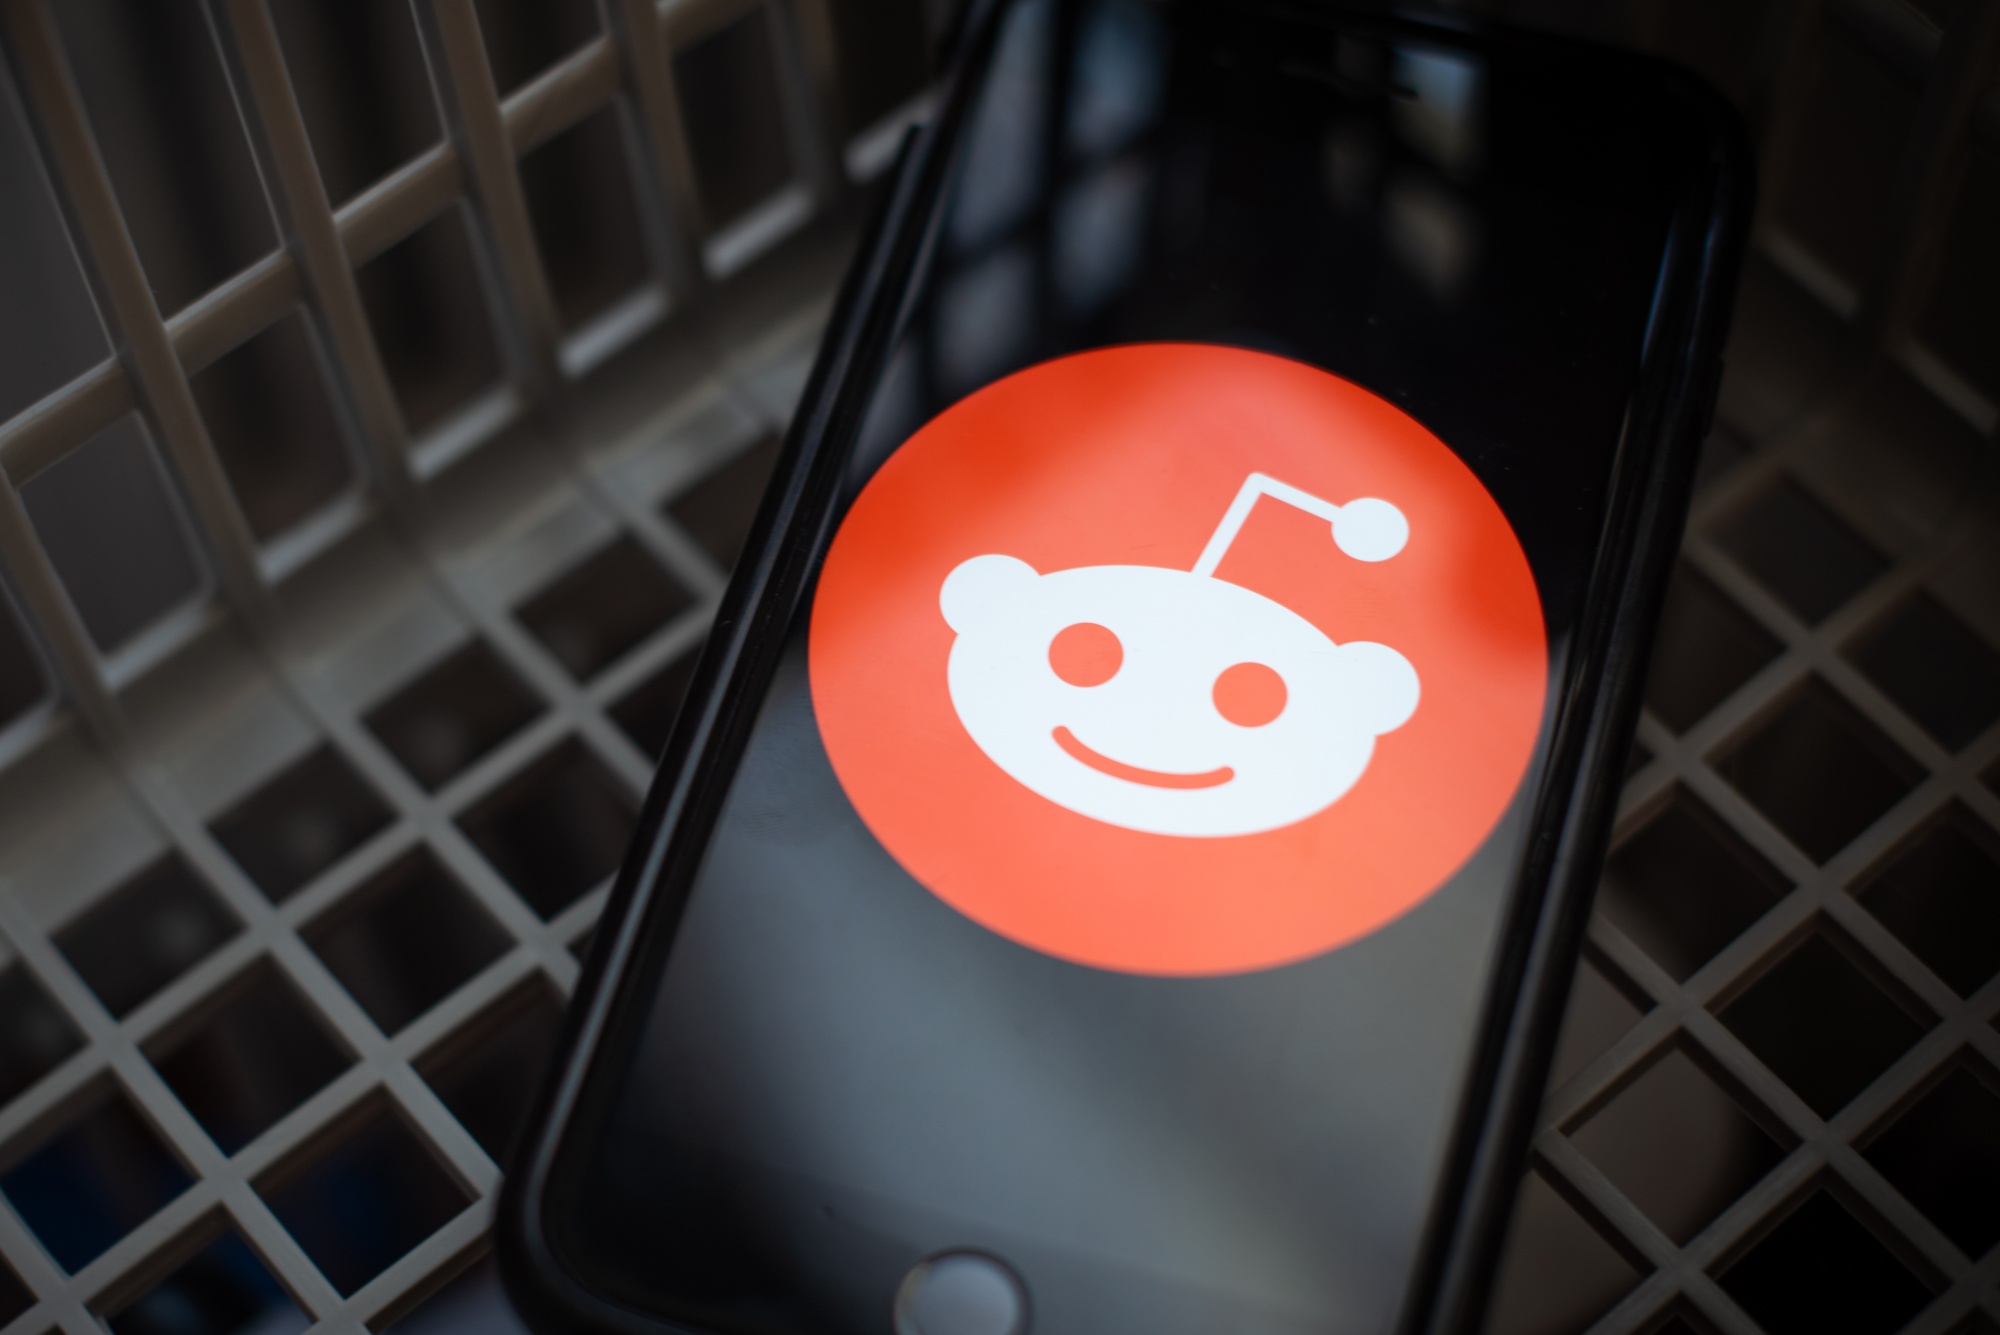 Black Friday: Why Reddit is such a trusted product review site - Vox